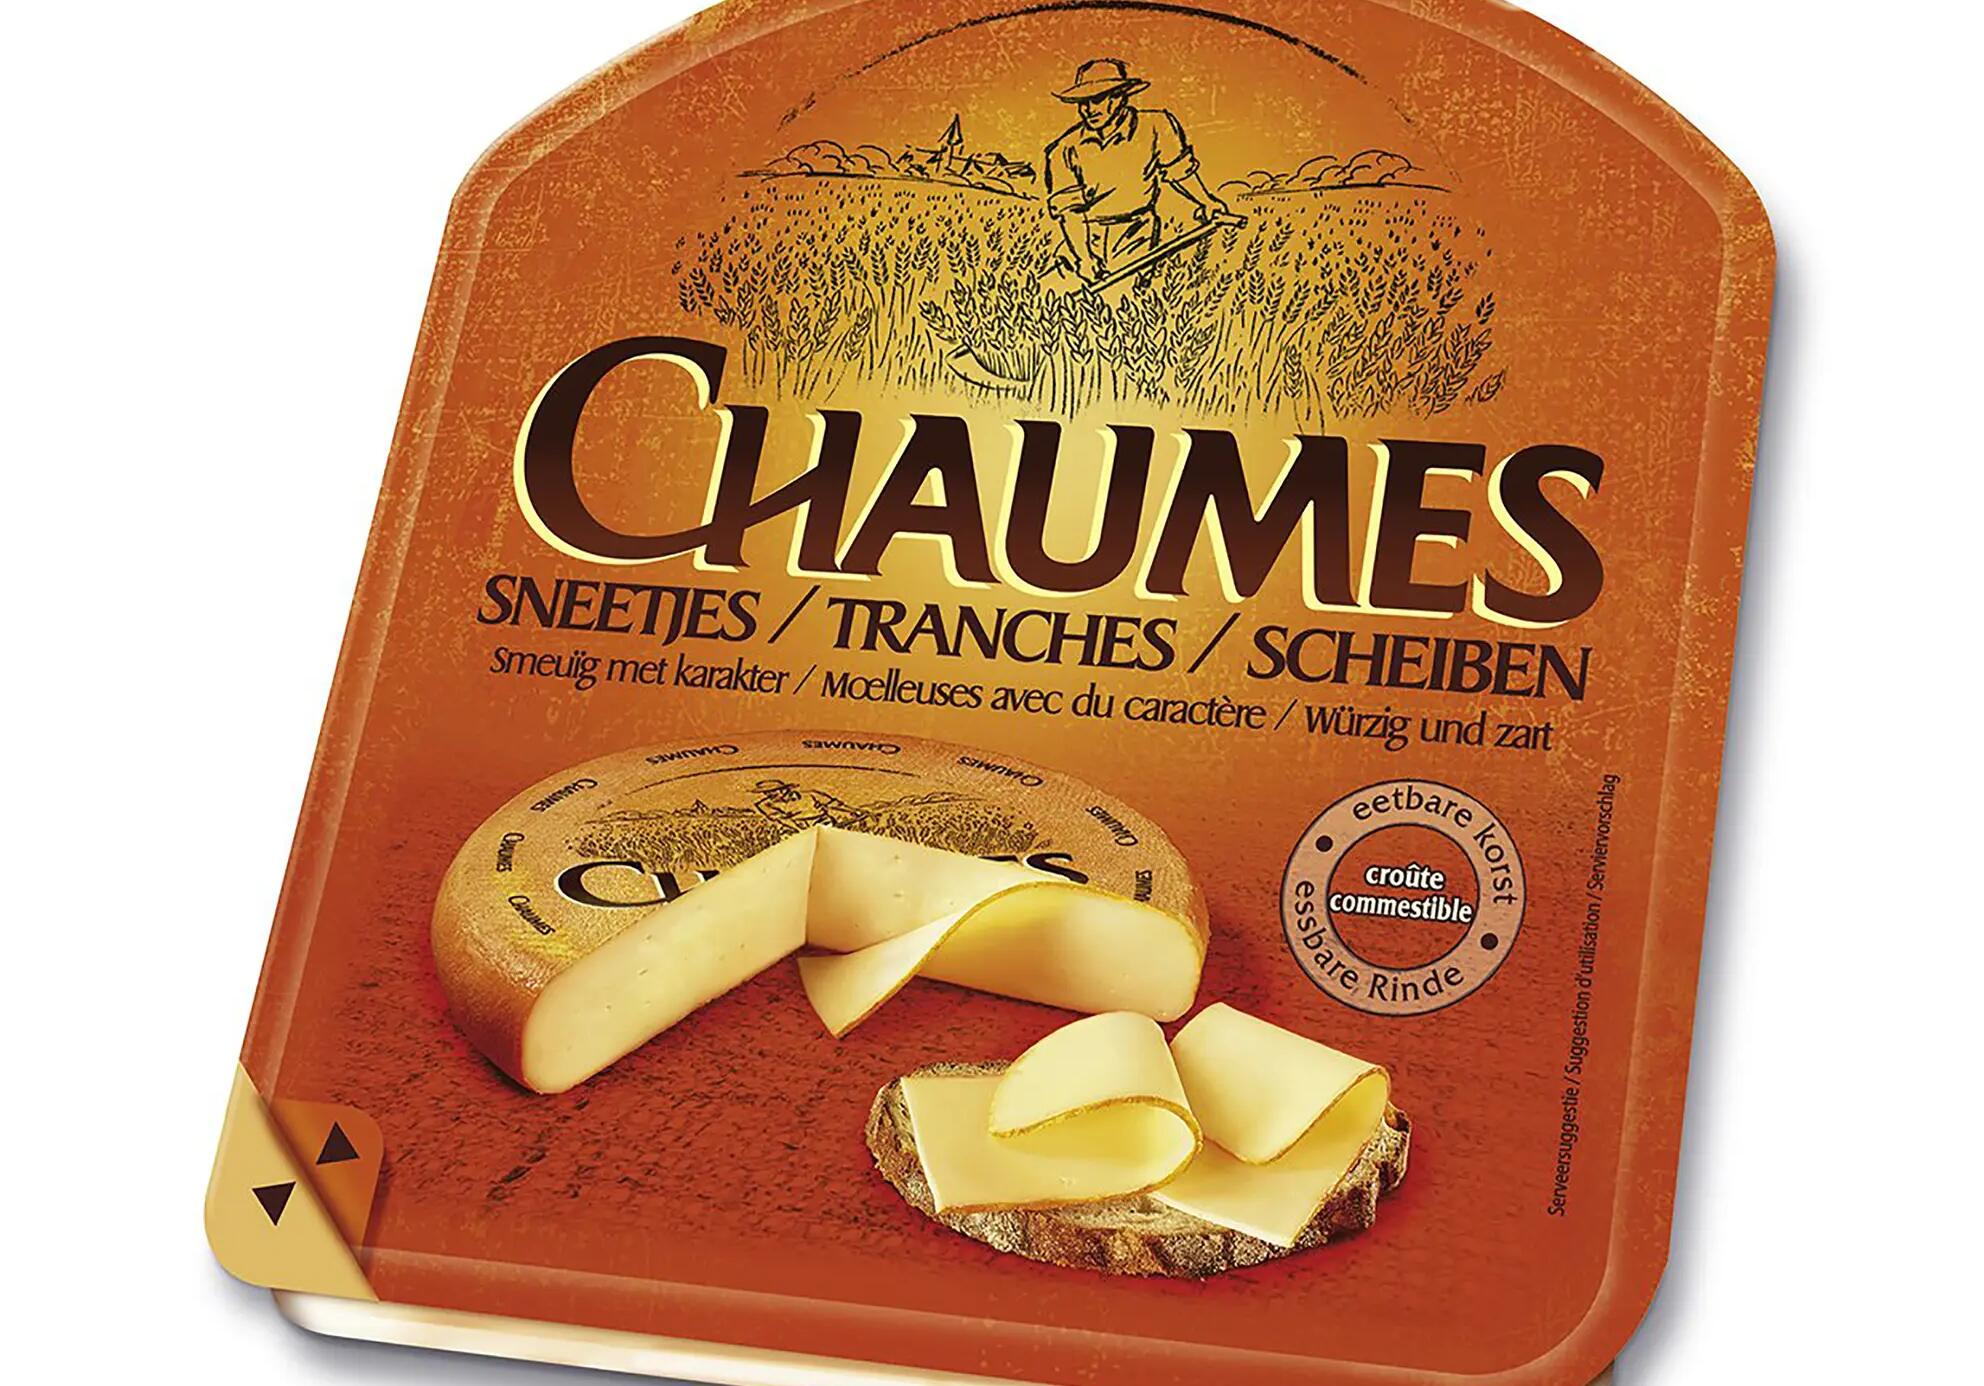 CHAUMES TRANCHES 150G